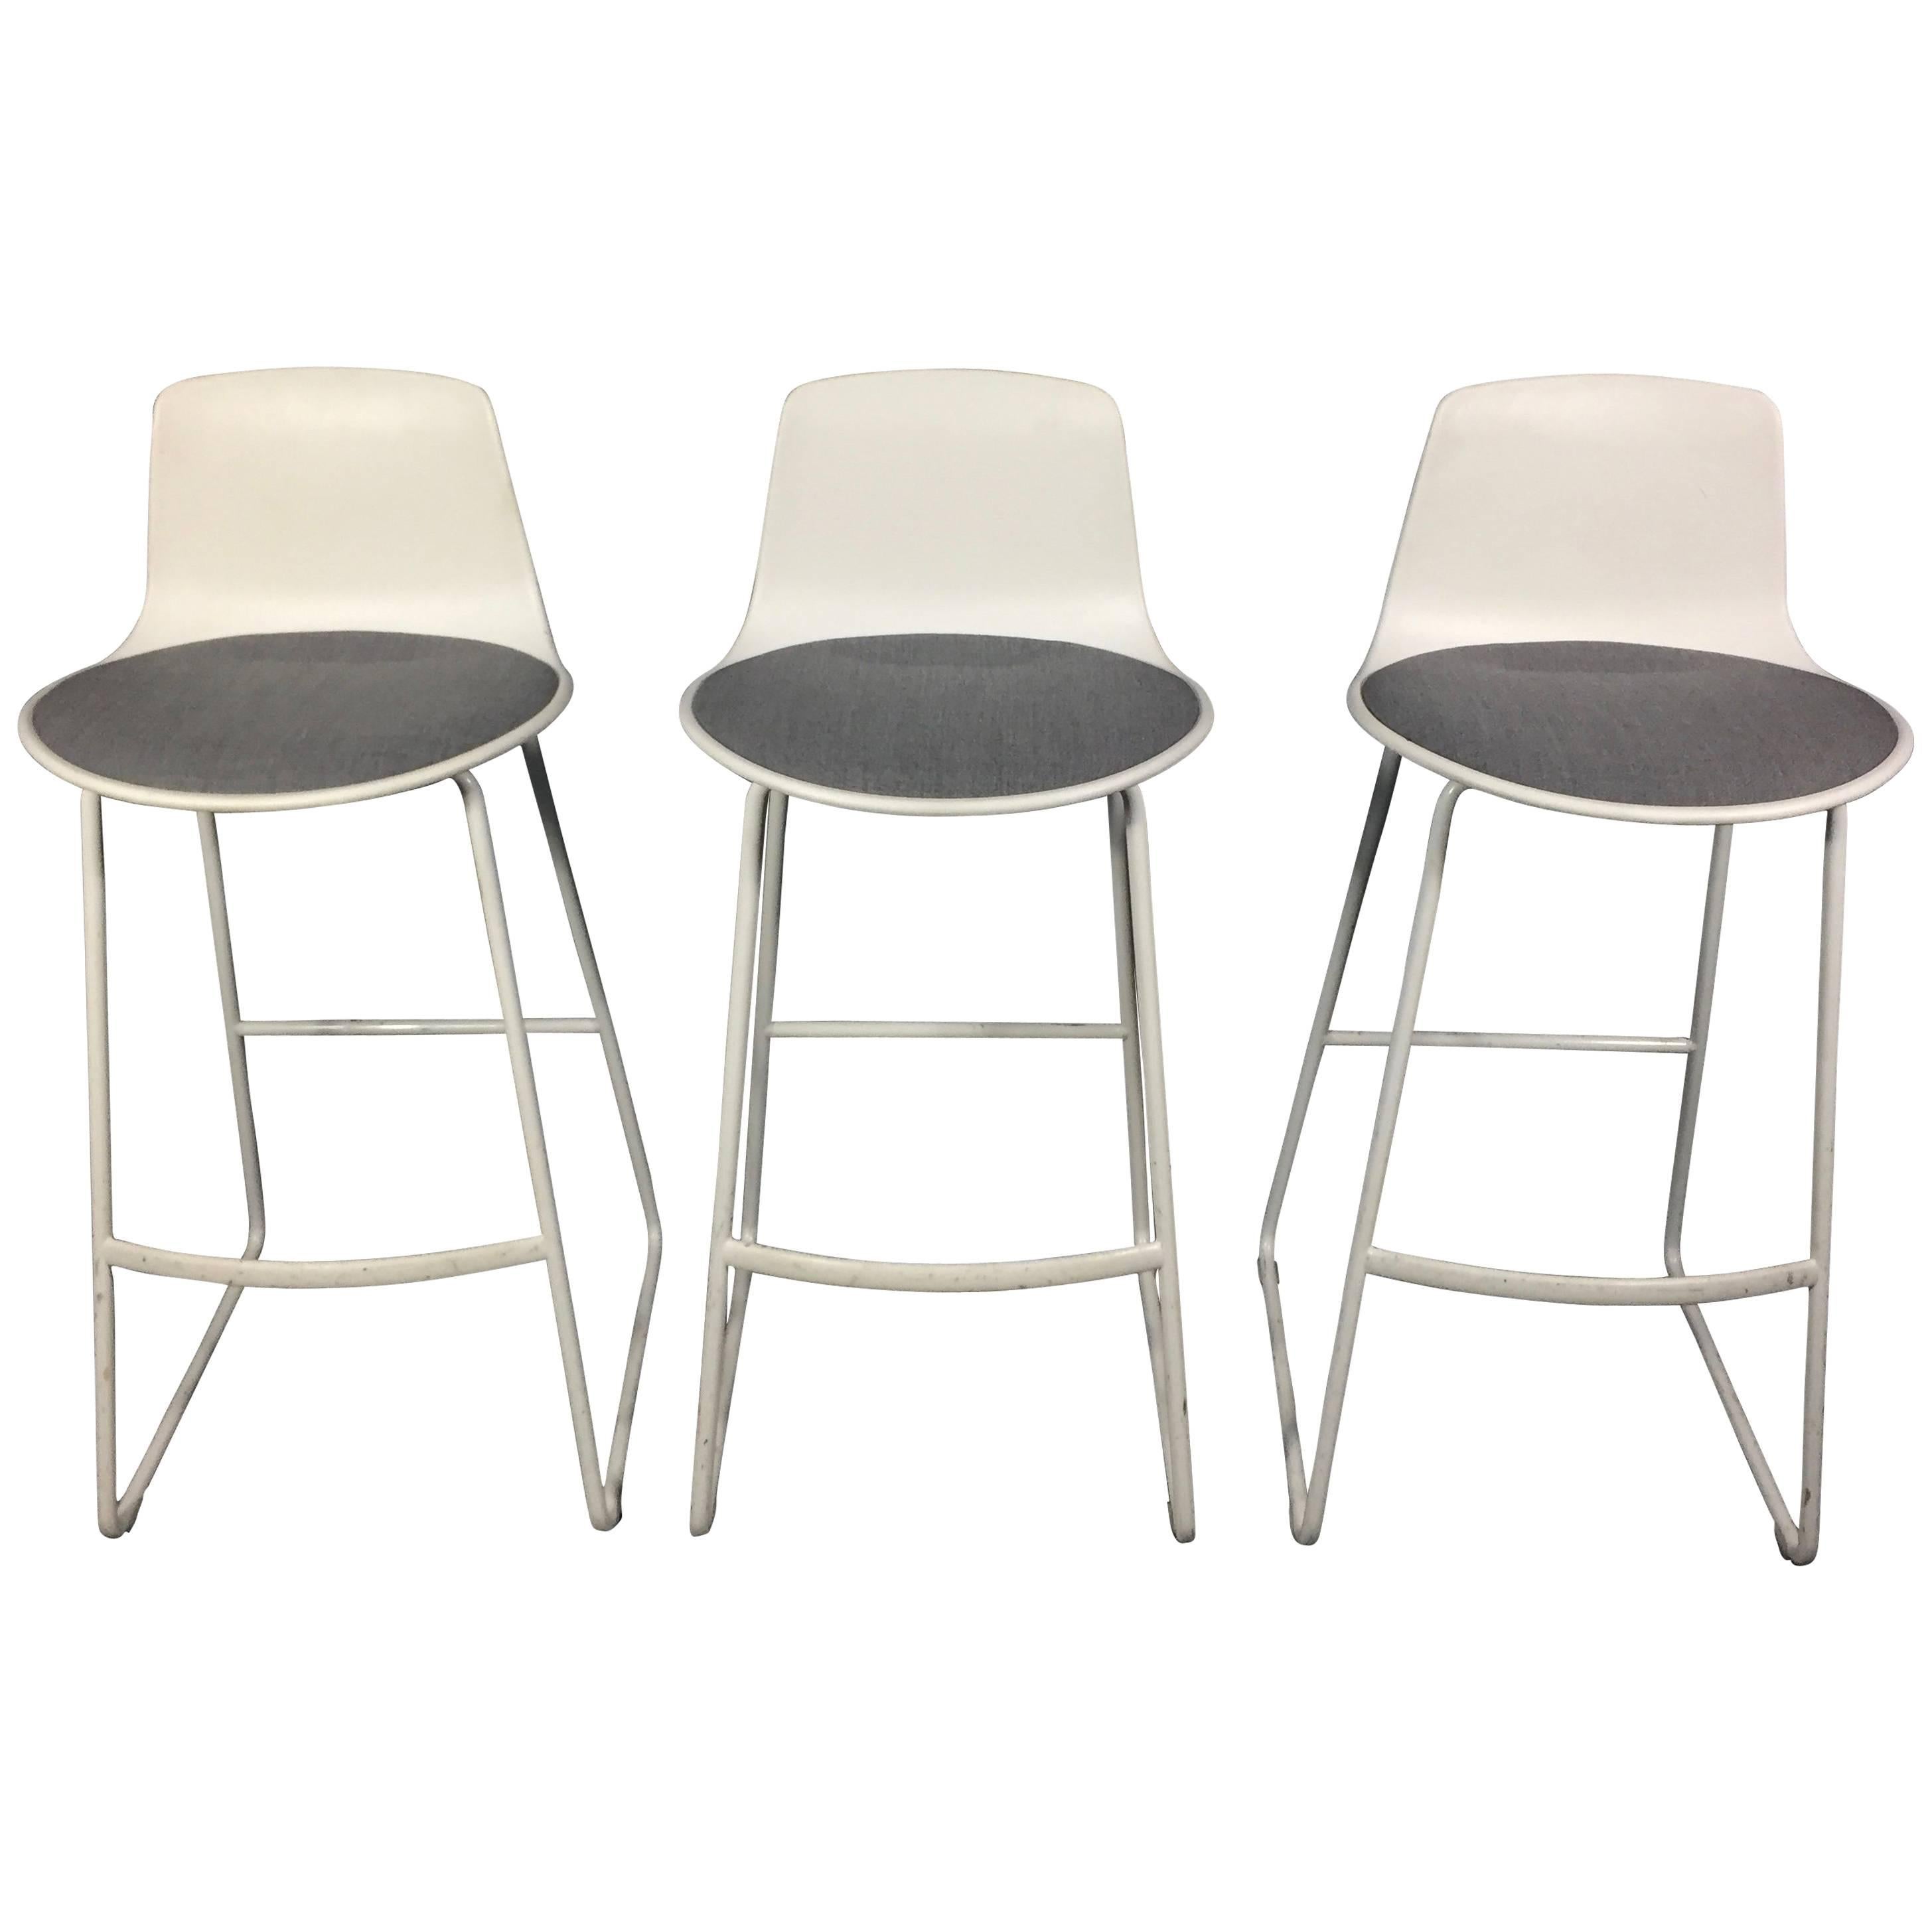 Enea Lotus Bar Stools by Lievore Altherr Molina, Spain For Sale